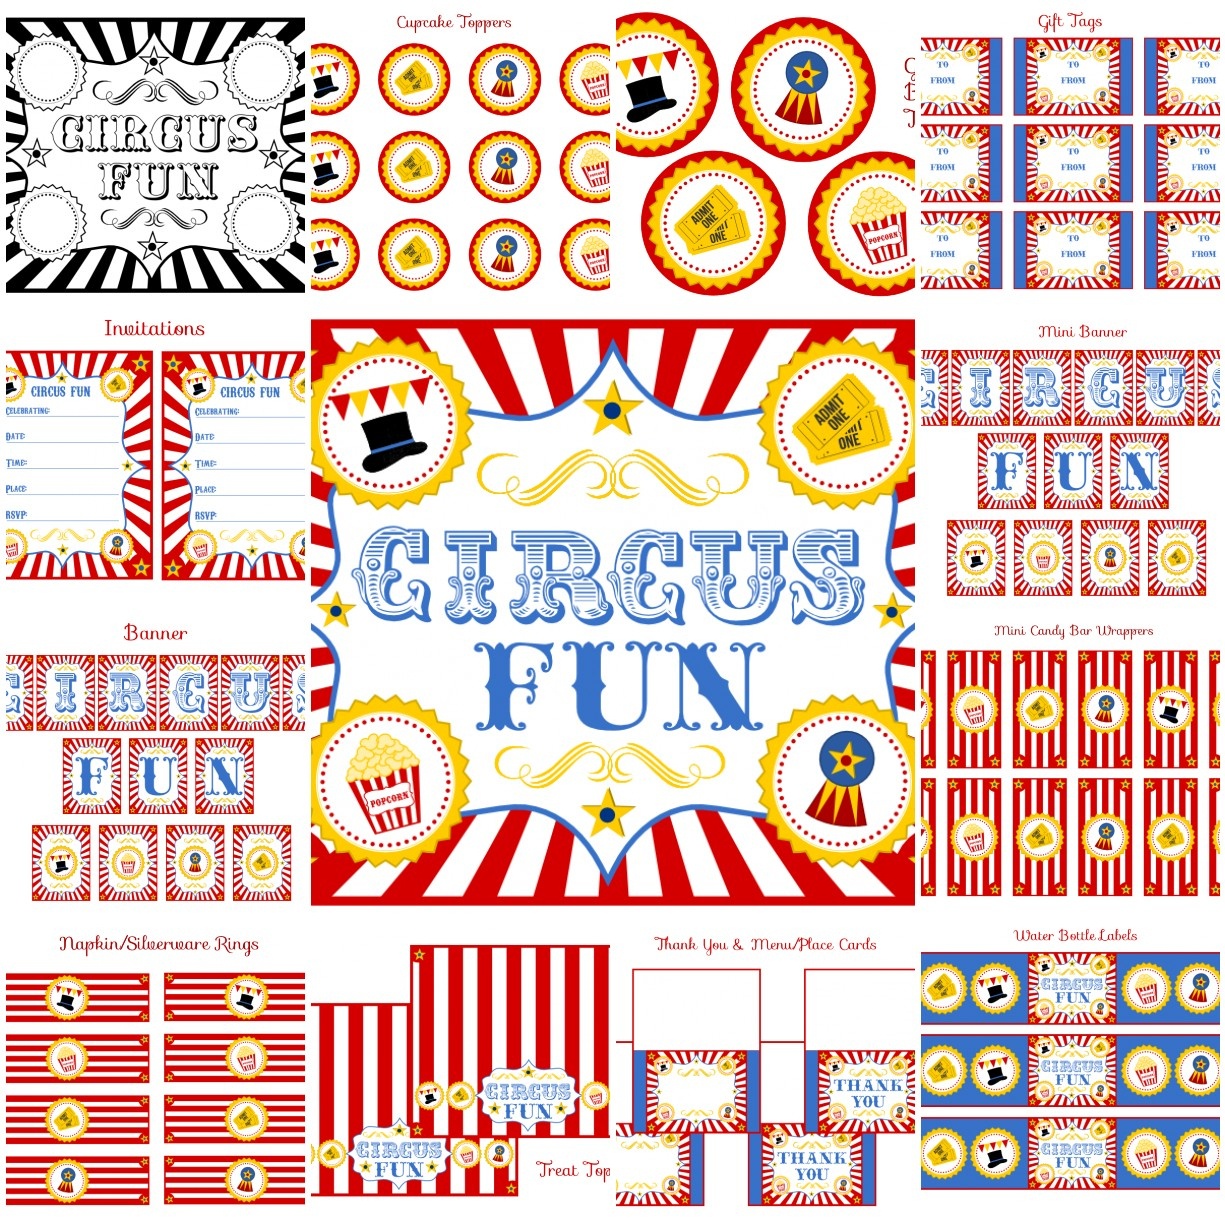 Free Circus Birthday Party Printables From Printabelle | Catch My Party - Free Printable Carnival Decorations